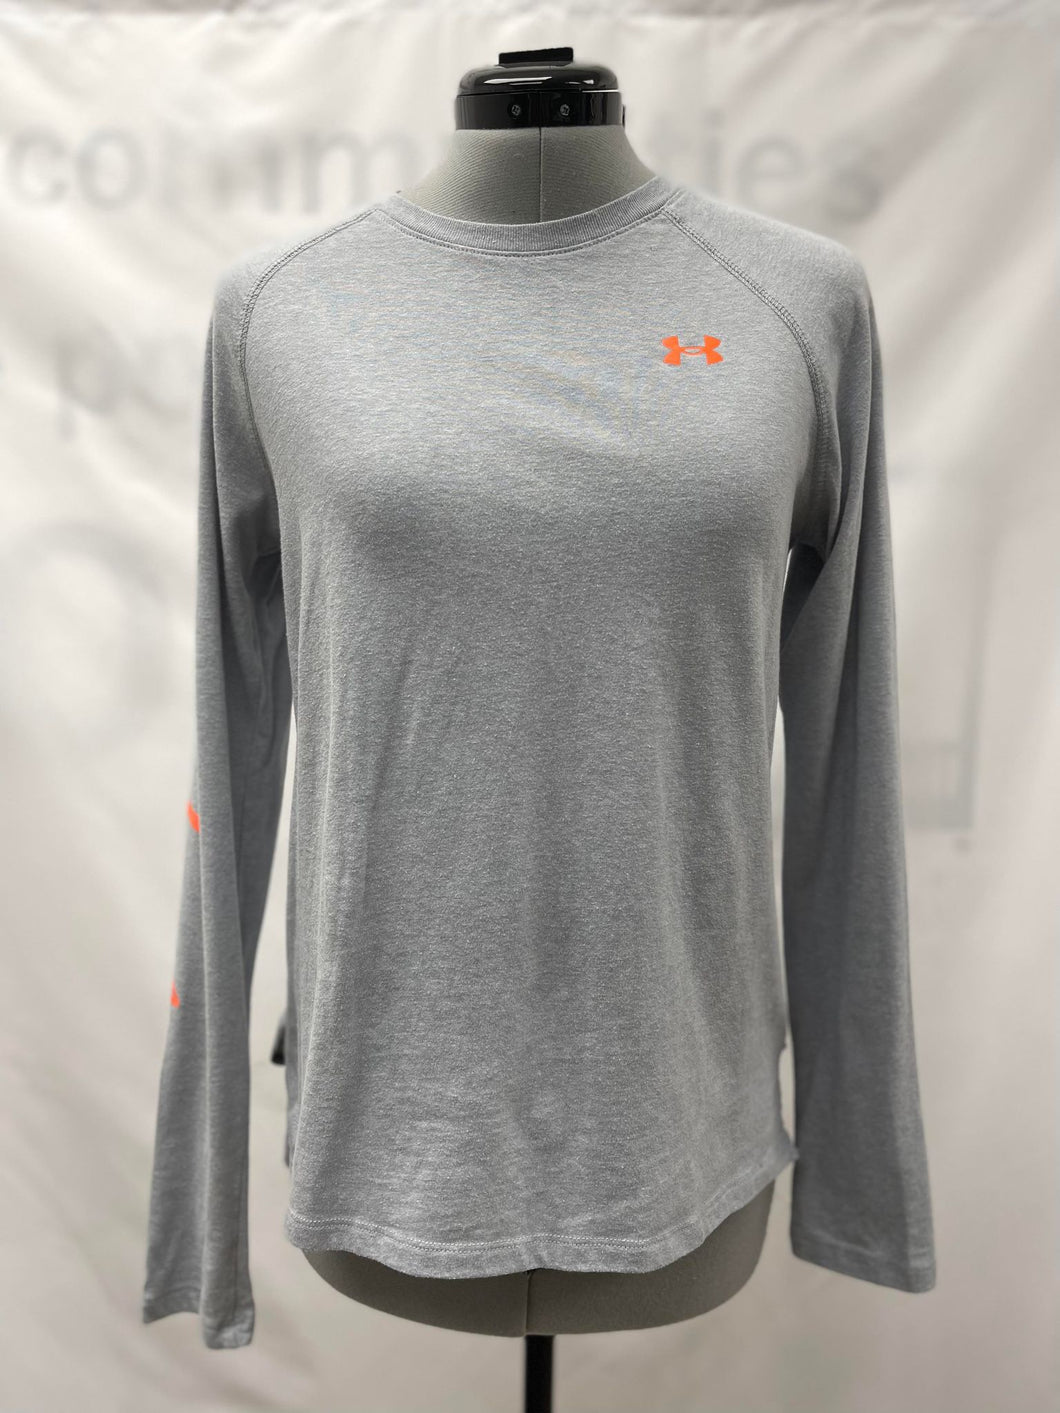 Women's Under Armour Long Sleeve Top, Small